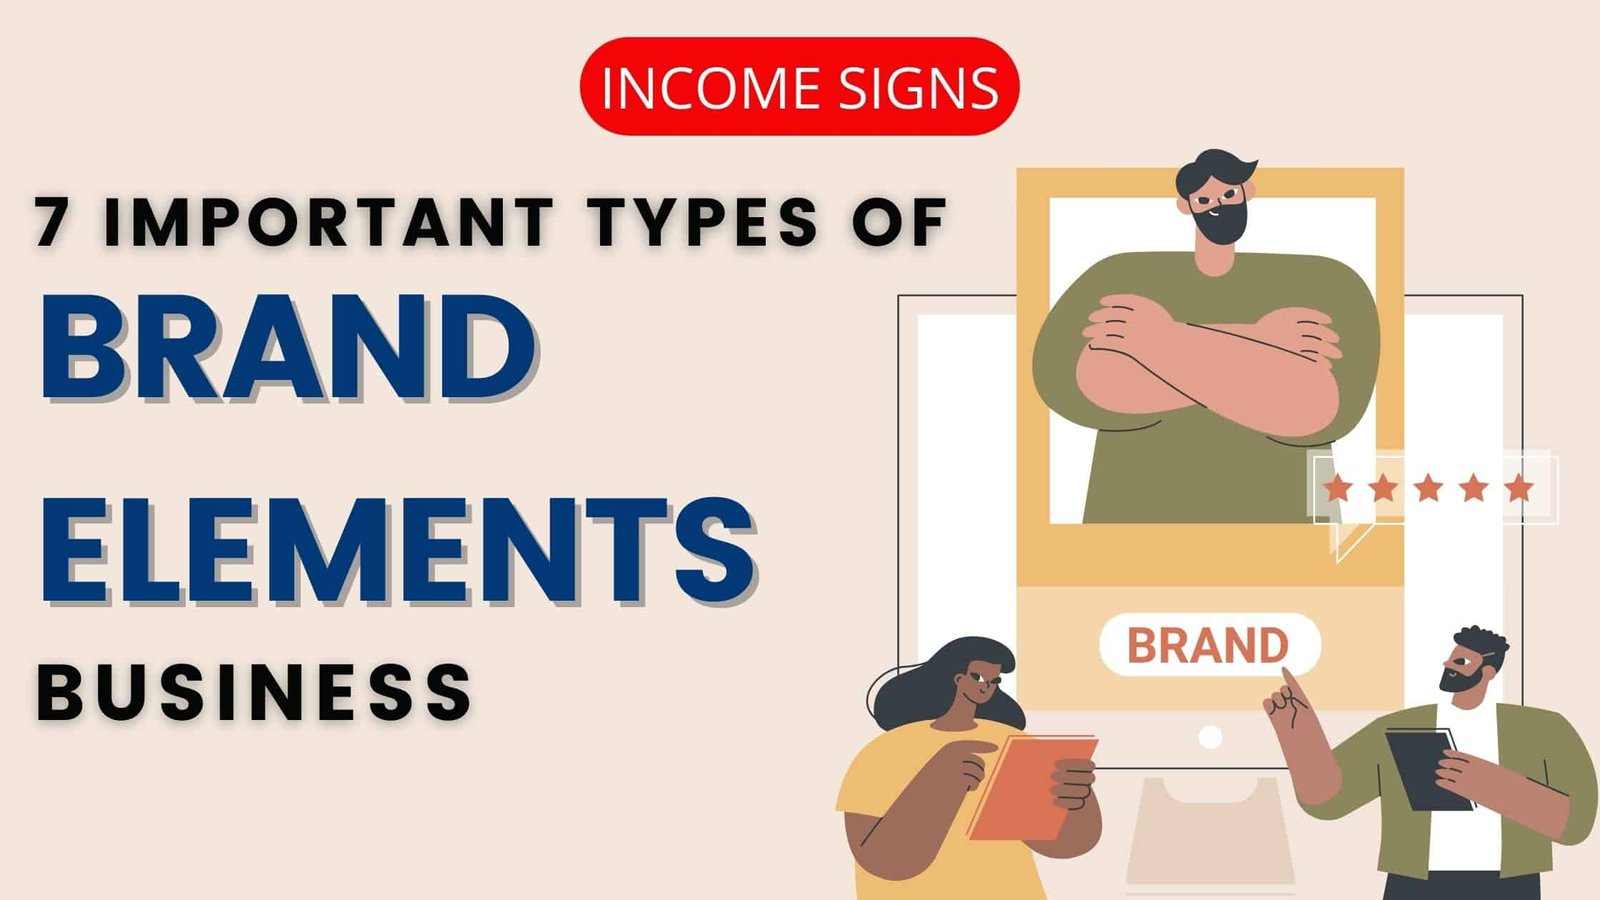 brand elements - 7 Important types of Brand Elements for your Business